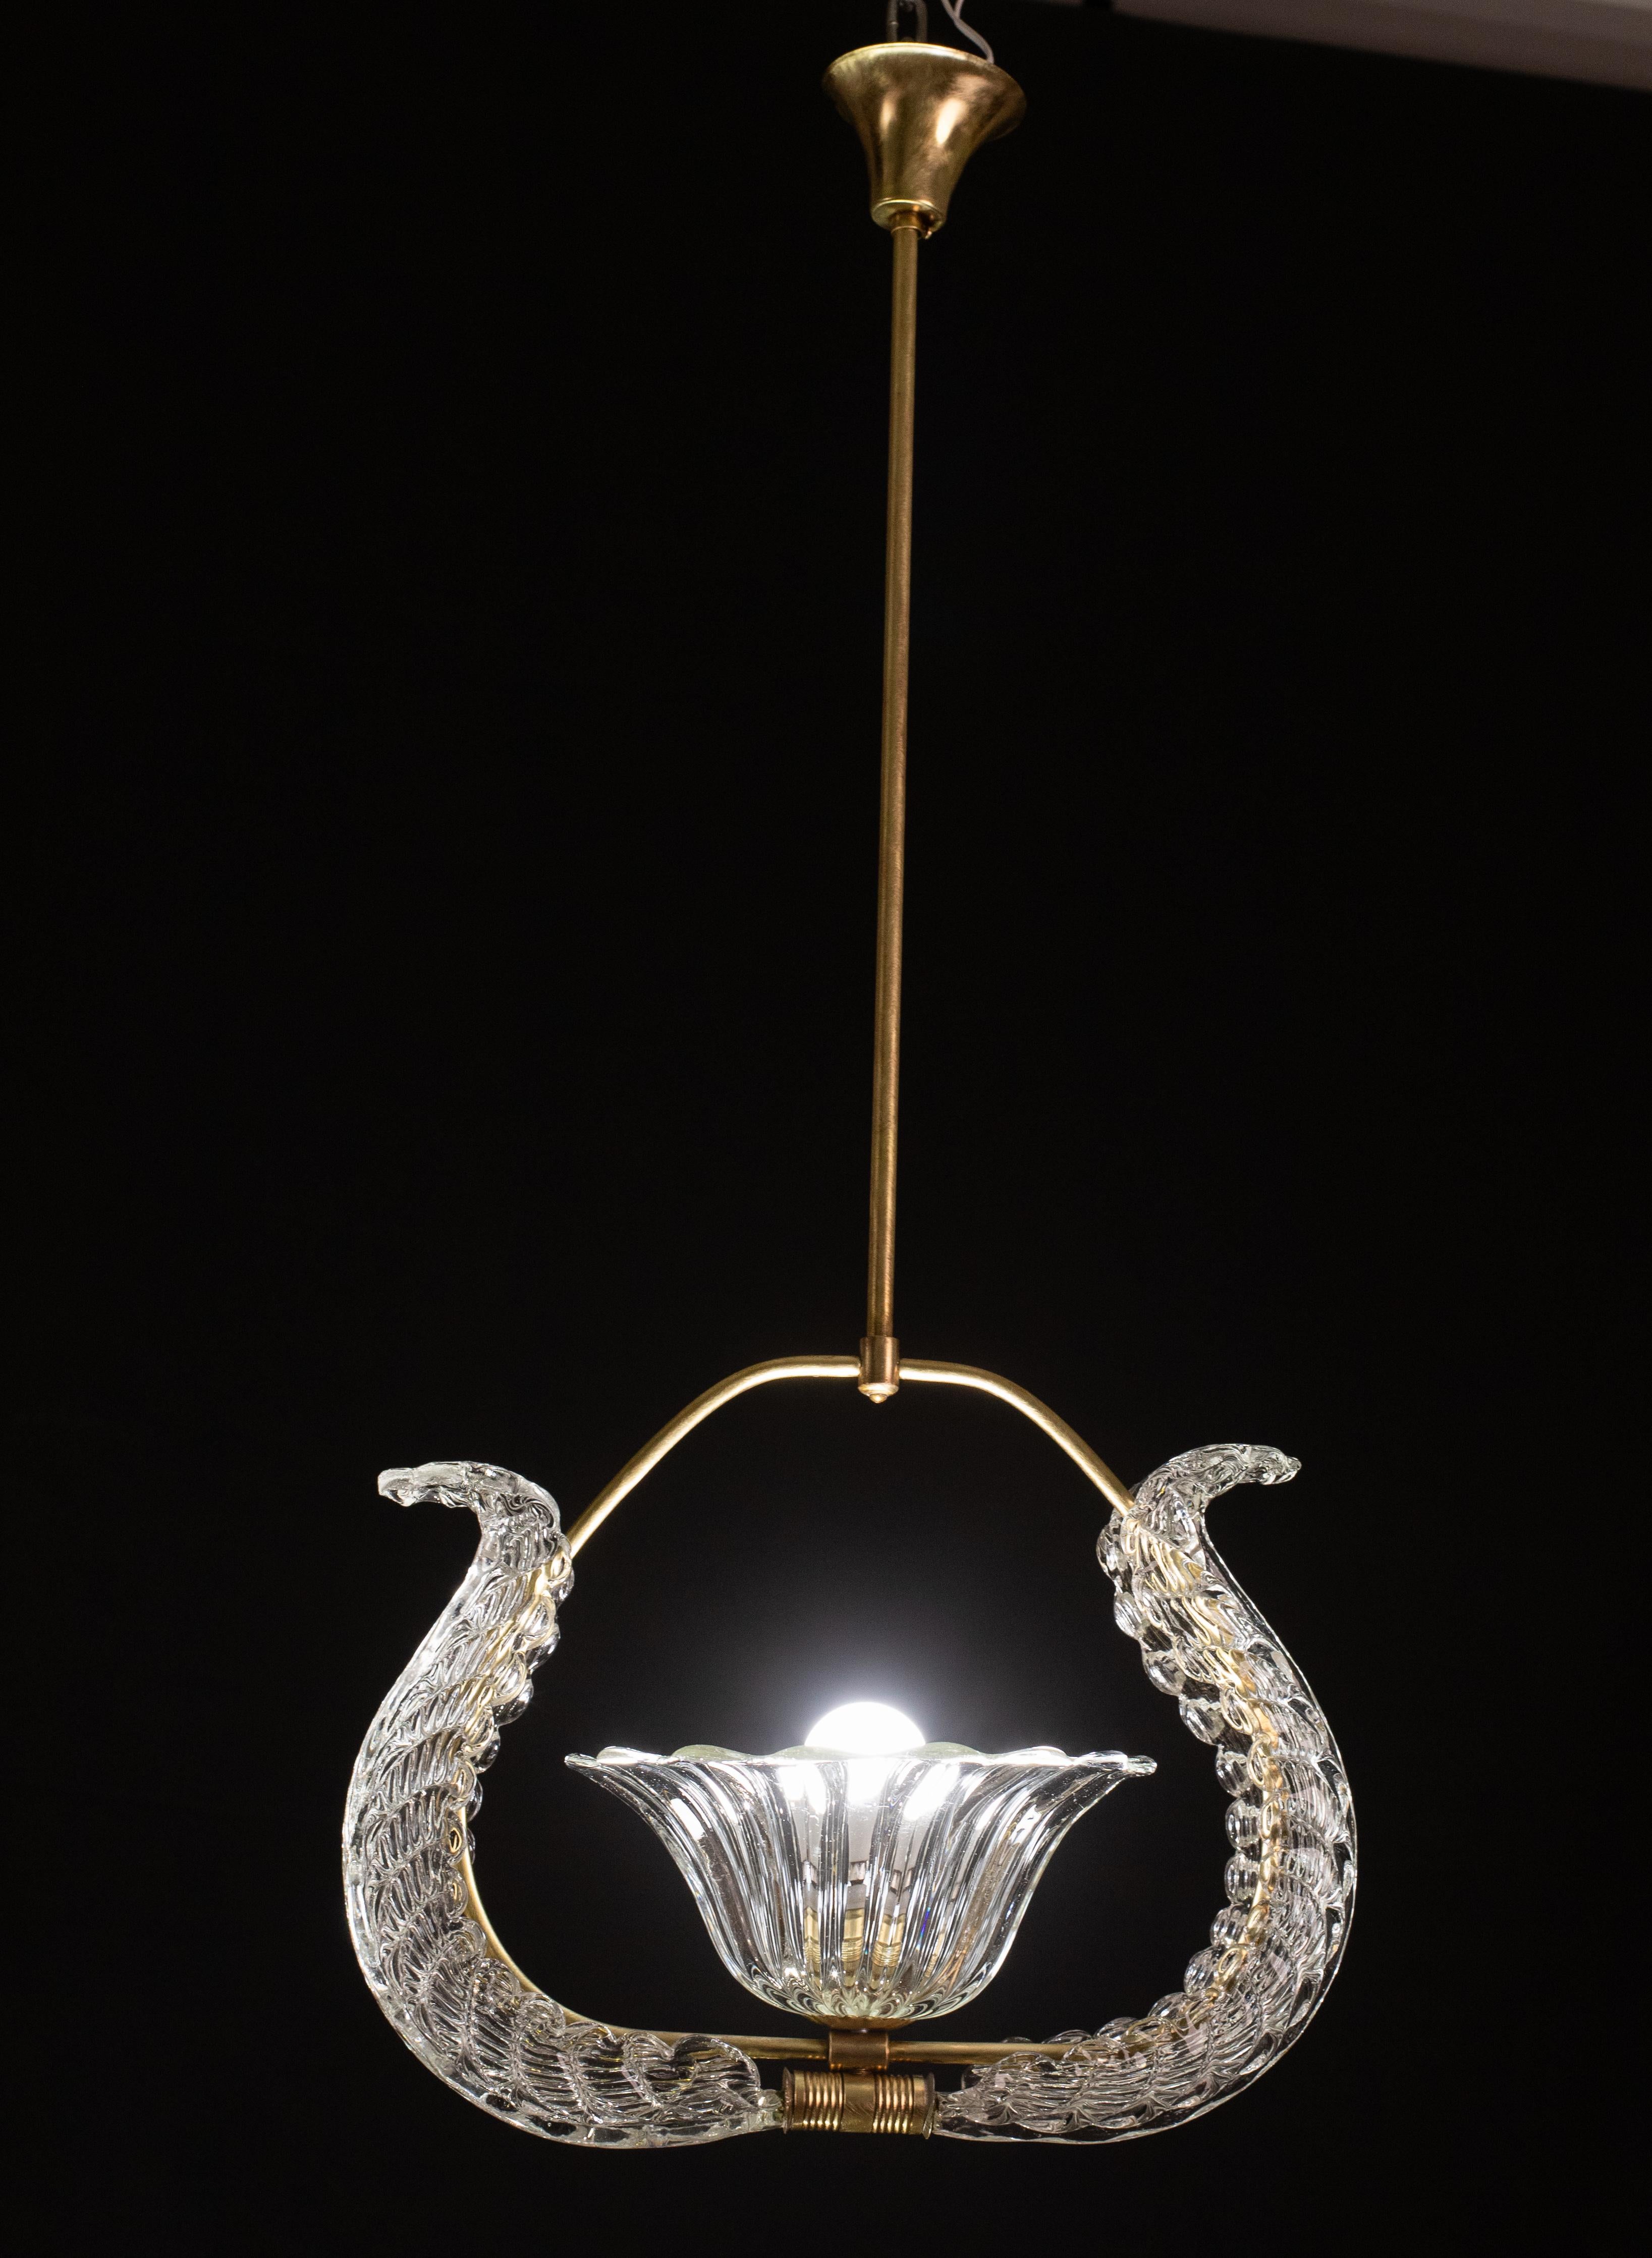 Pretty Murano chandelier attributed to Ercole Barovier.

The chandelier measures 85 centimeters in height, 40 centimeter with no rod, and 38 cm diameter.

Good vintage condition but there is a very small defect on a leaf, not visible to the